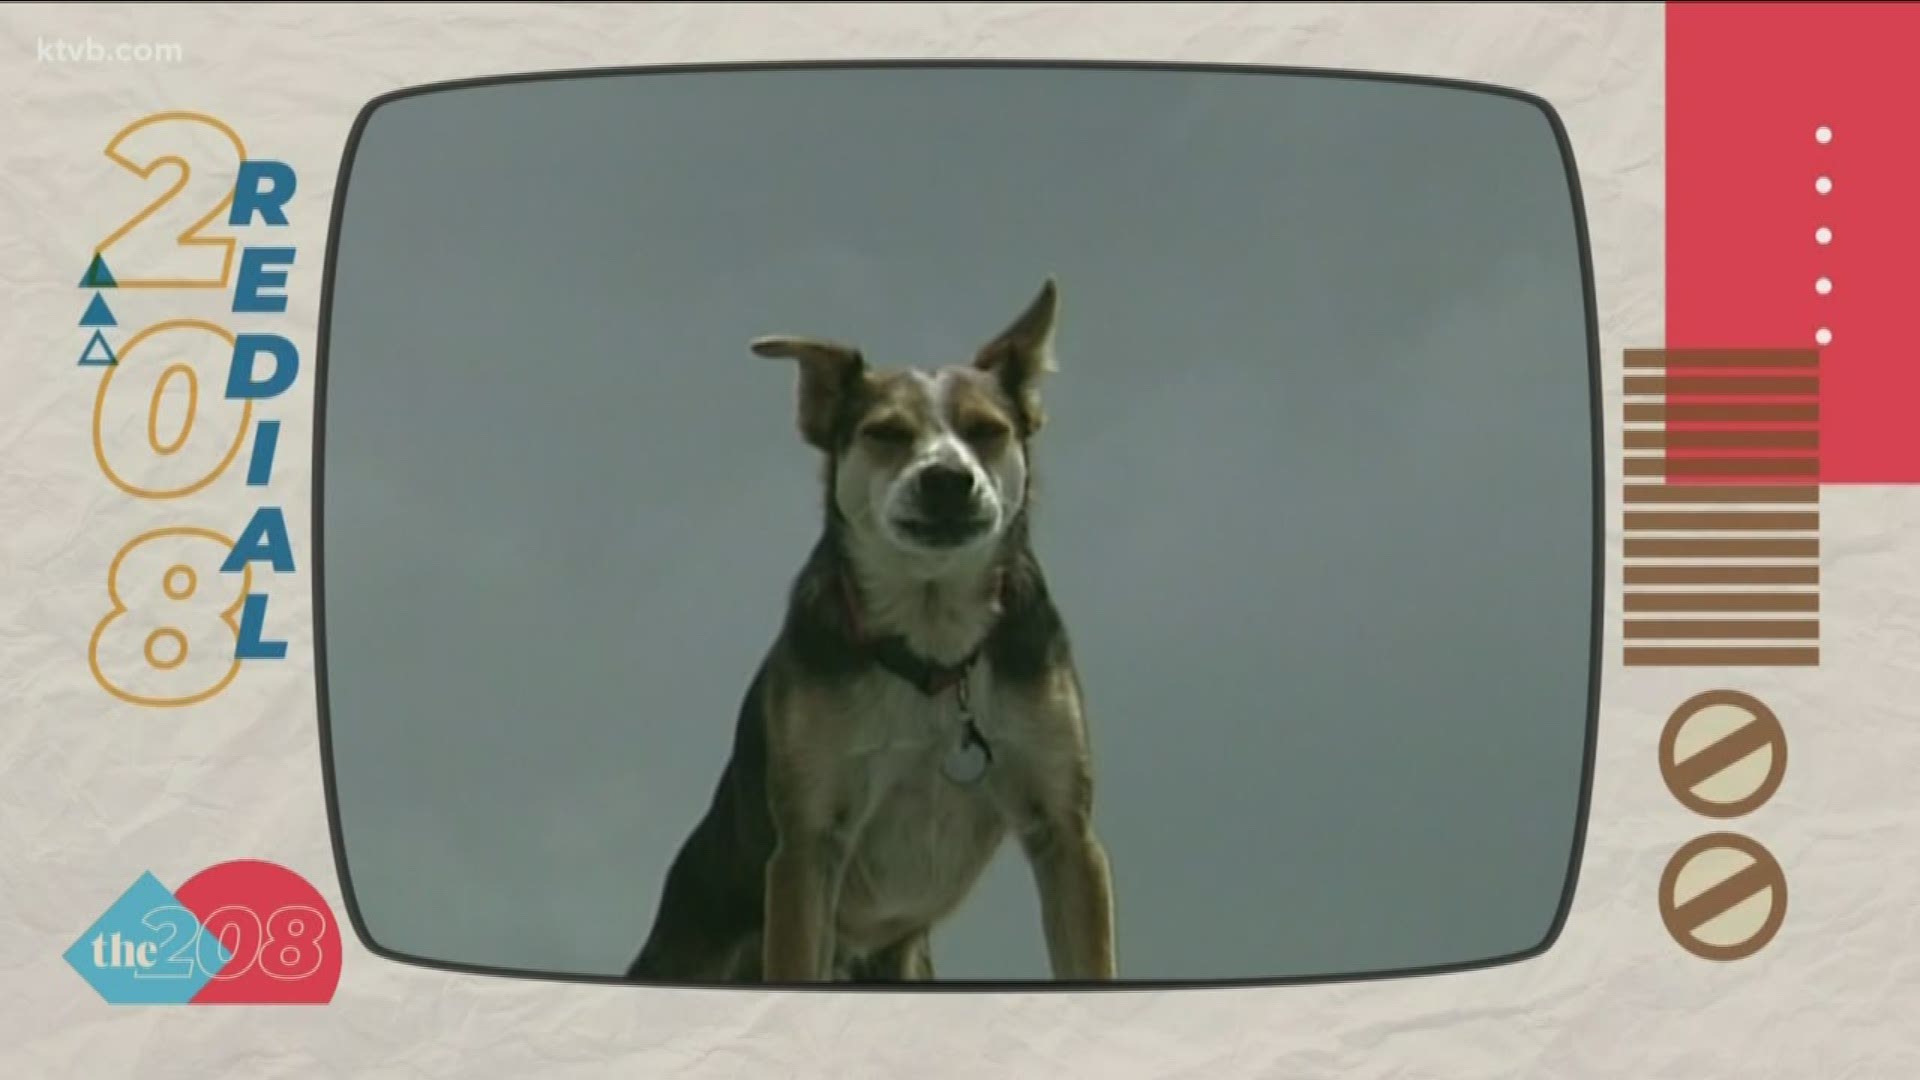 In 1999, KTVB's John Miller introduced viewers to the neighborhood dog known only as 'Roof Dog.' Can you guess why he was given that name?